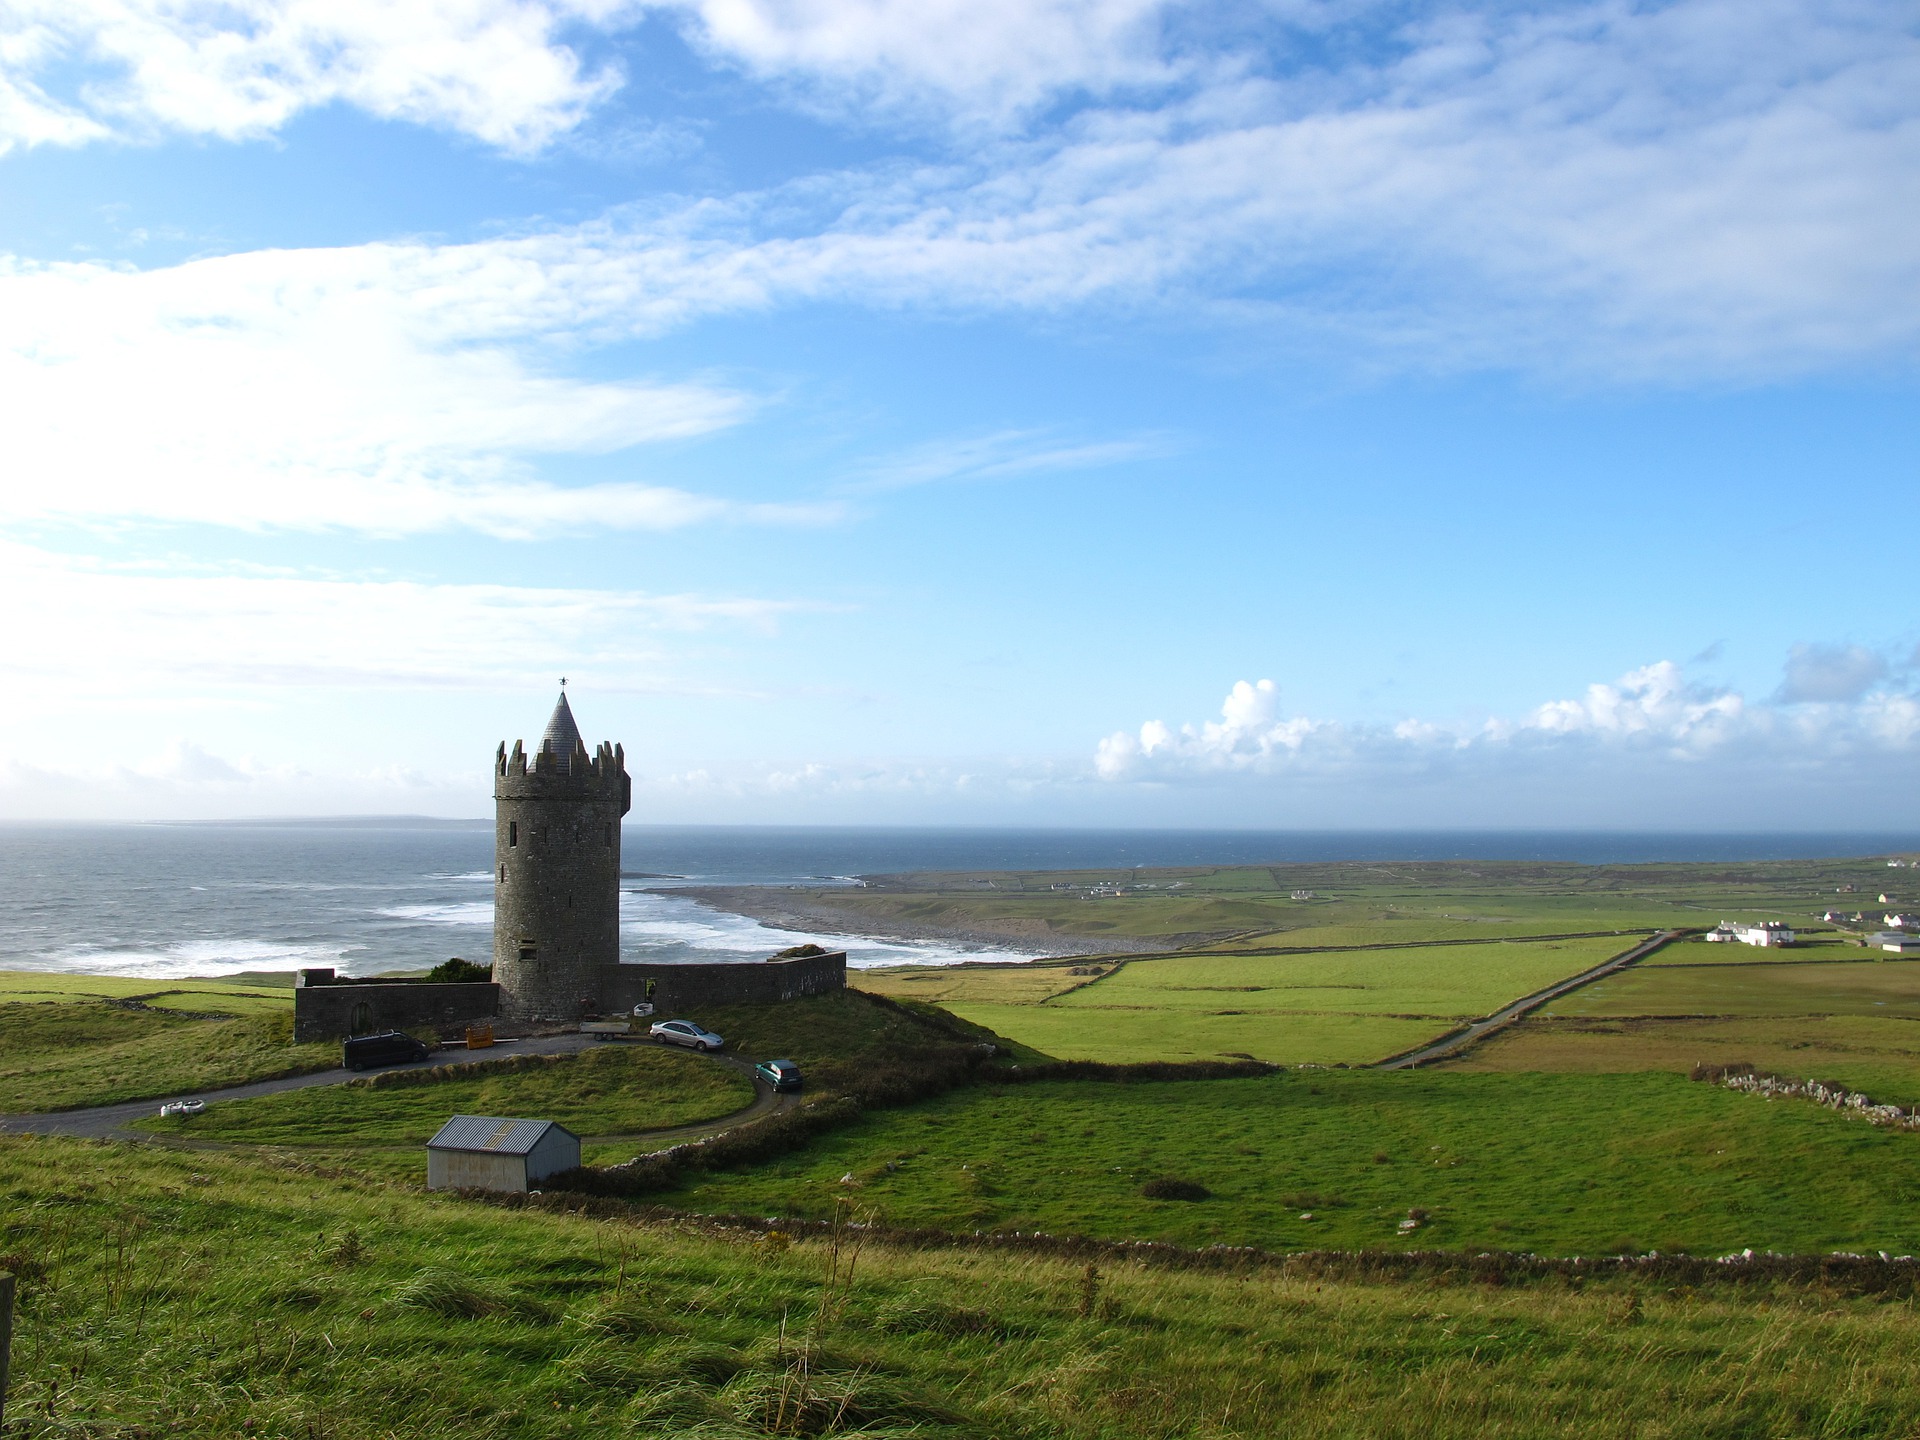 The short training programmes offer the chance to discover beautiful countries such as Ireland